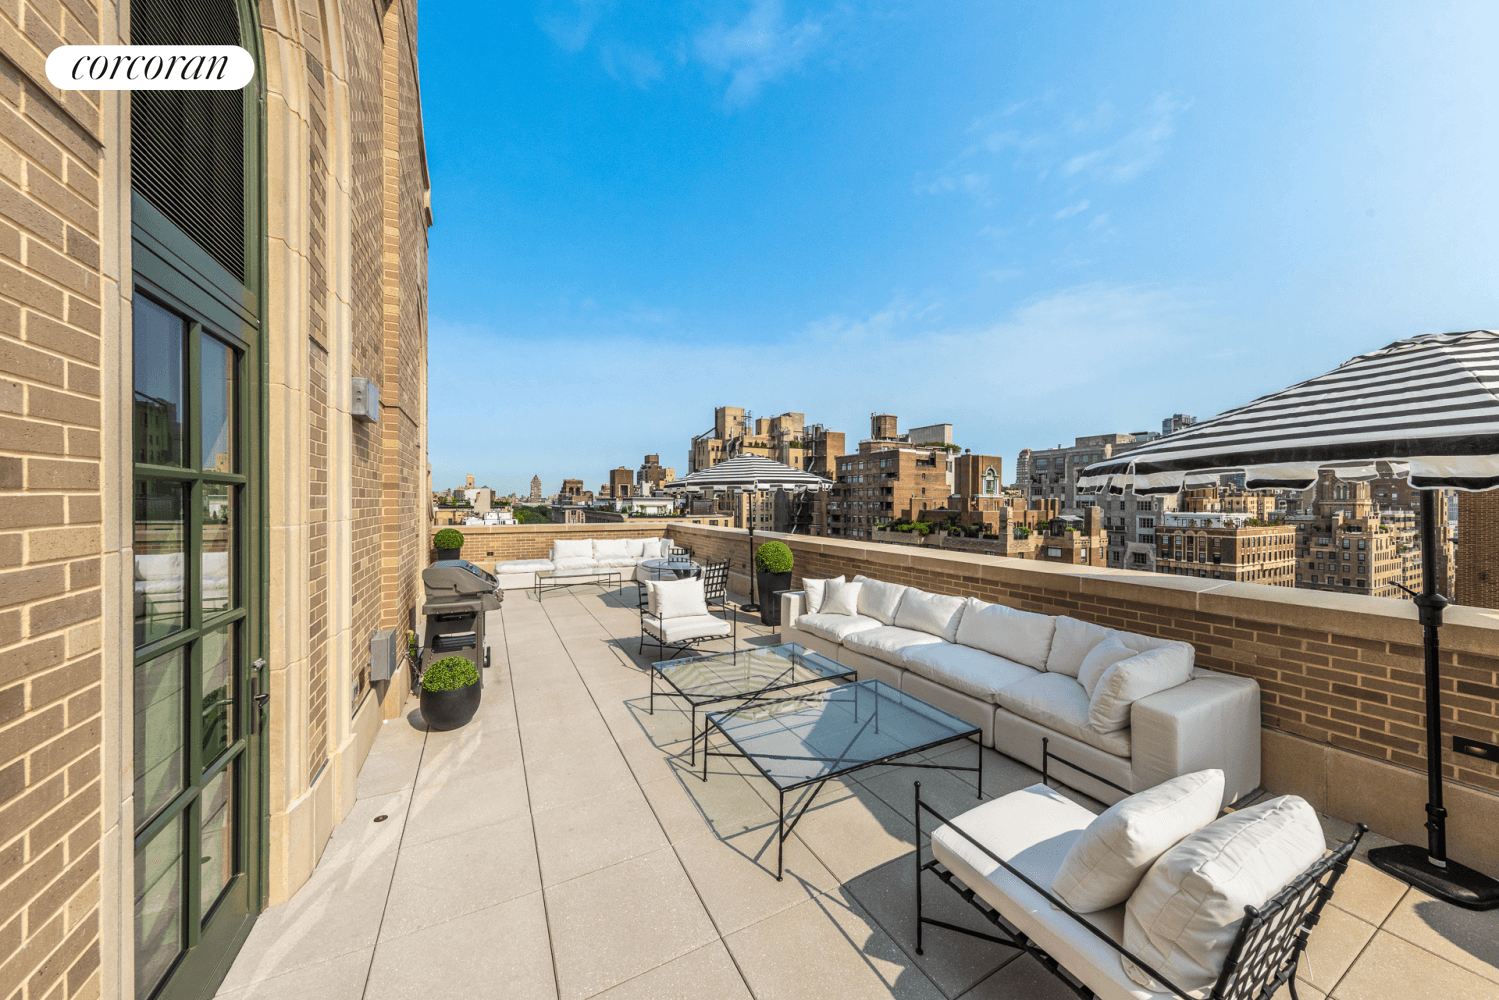 Welcome to the epitome of luxury living in Manhattan, this trophy penthouse is located on the top two floors of the brand new Robert A.